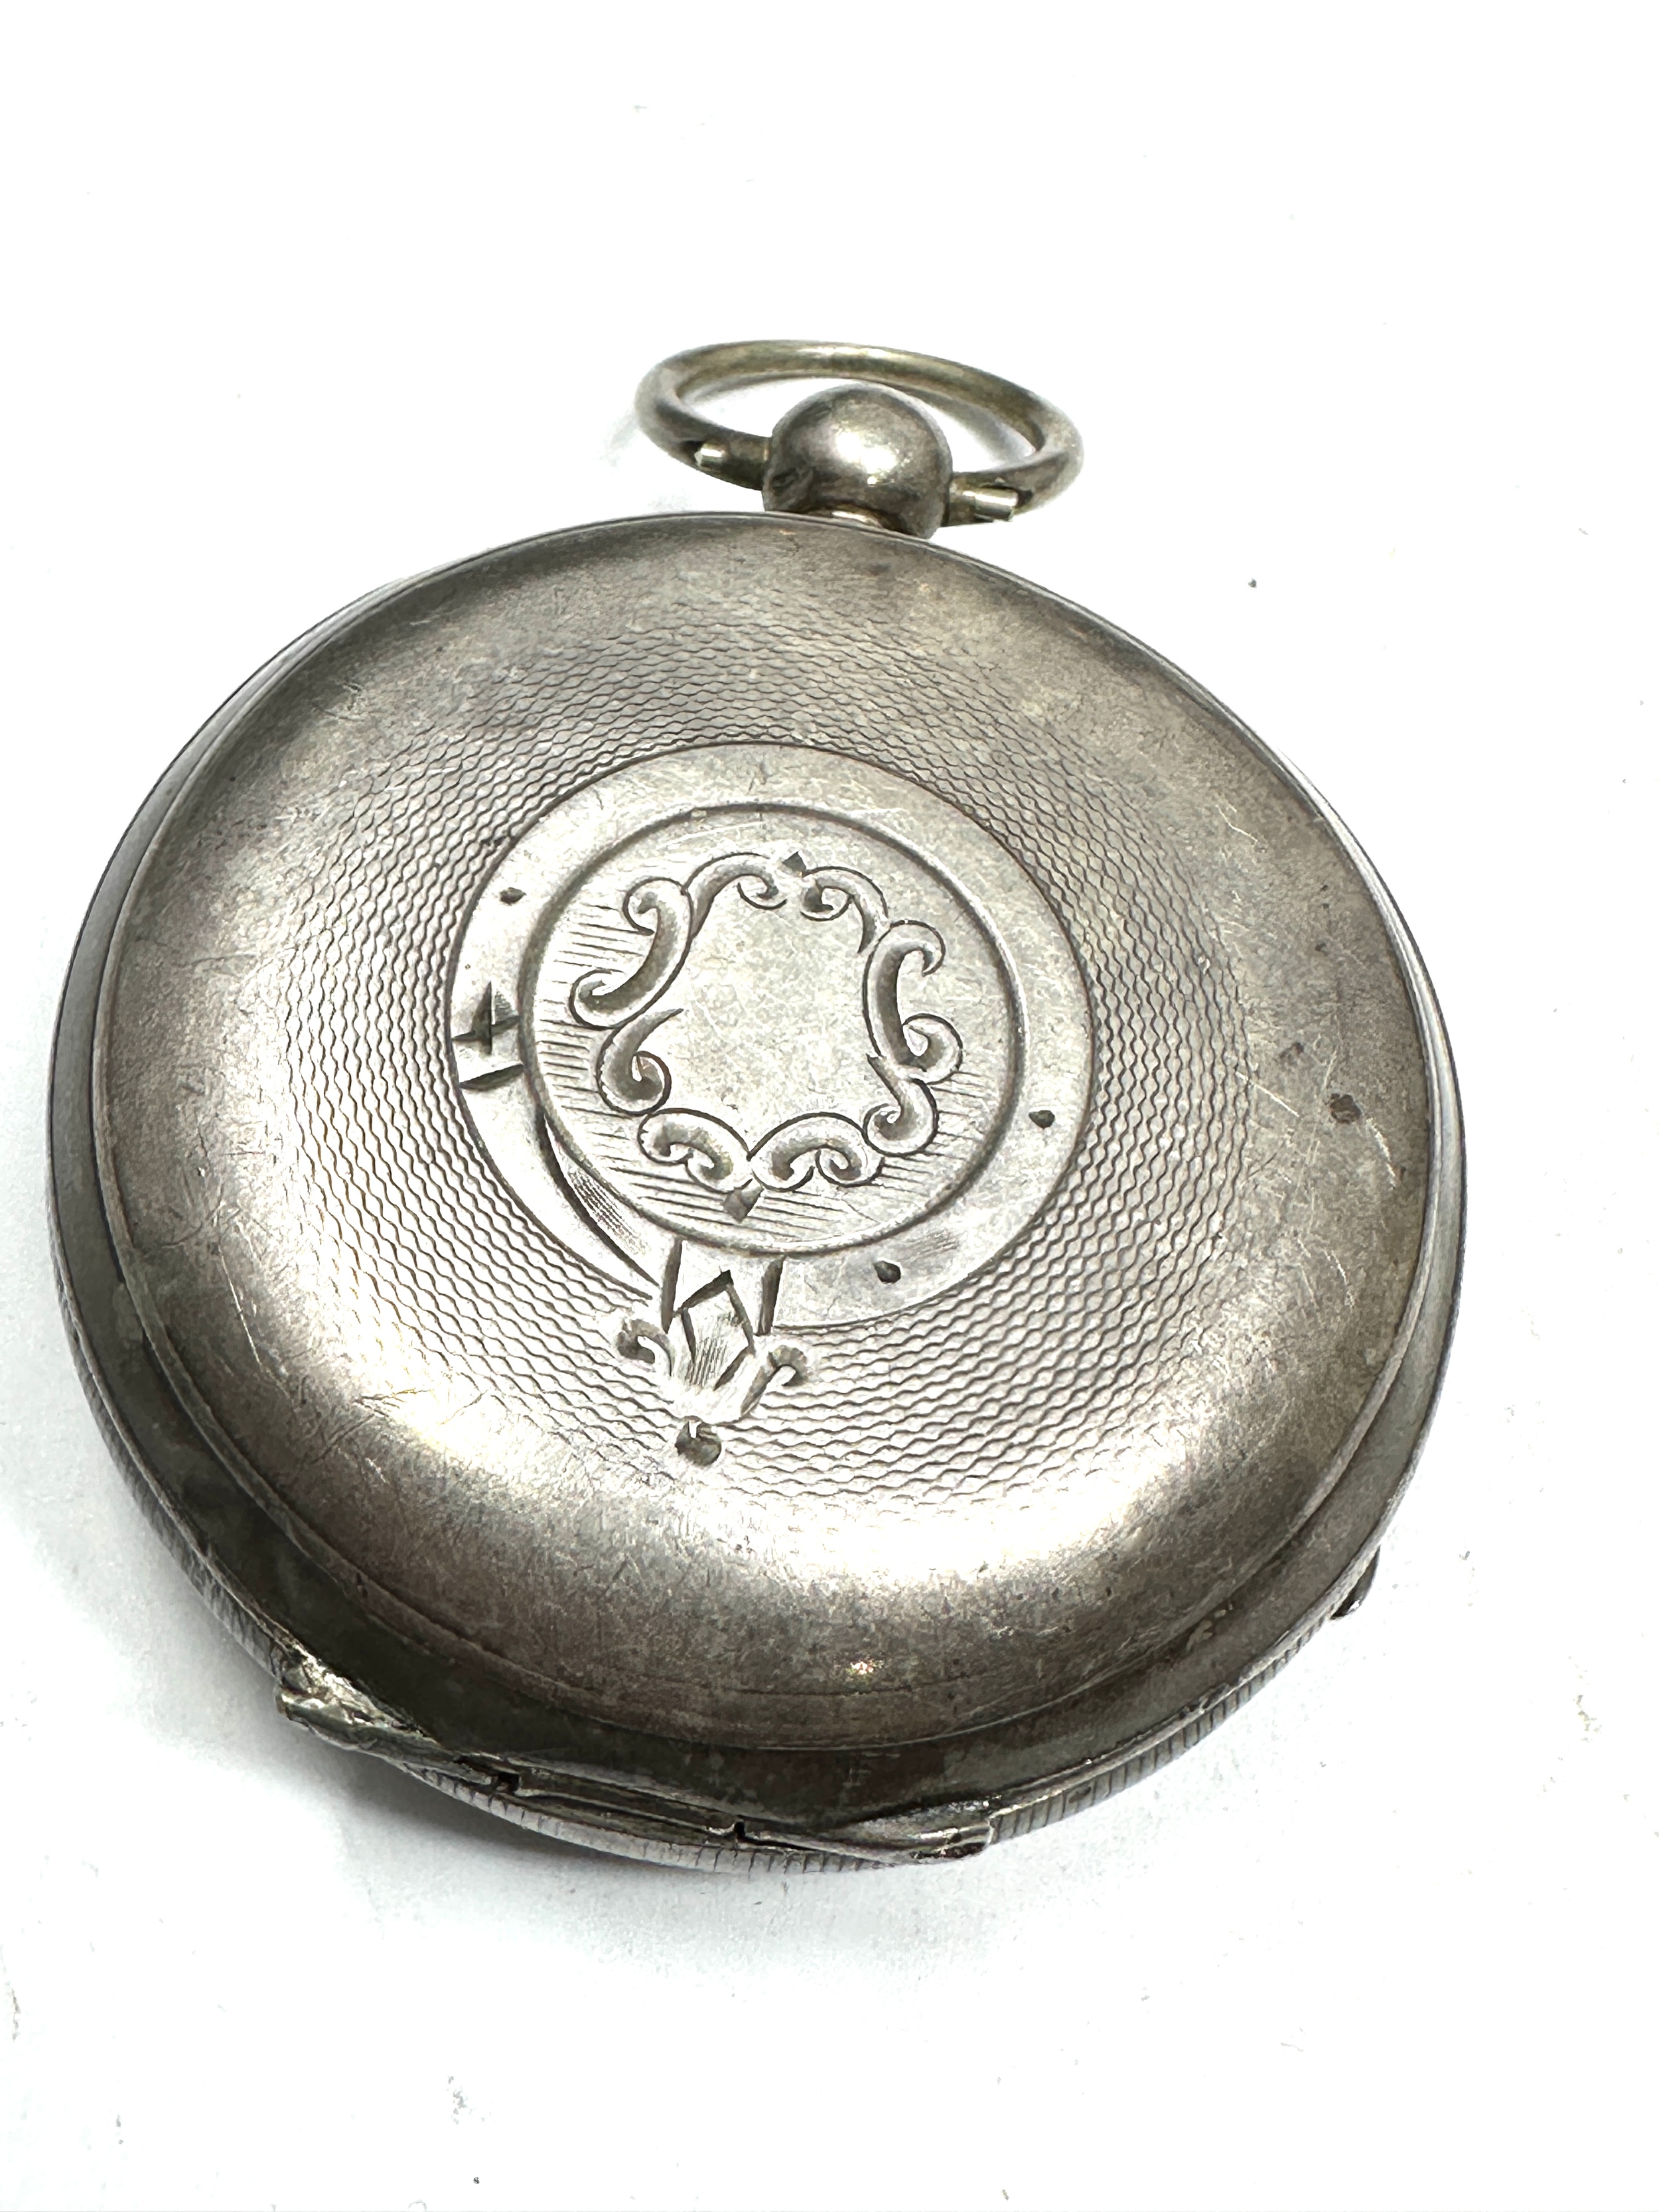 Antique silver open face pocket watch the watch is ticking missing hands - Image 2 of 4